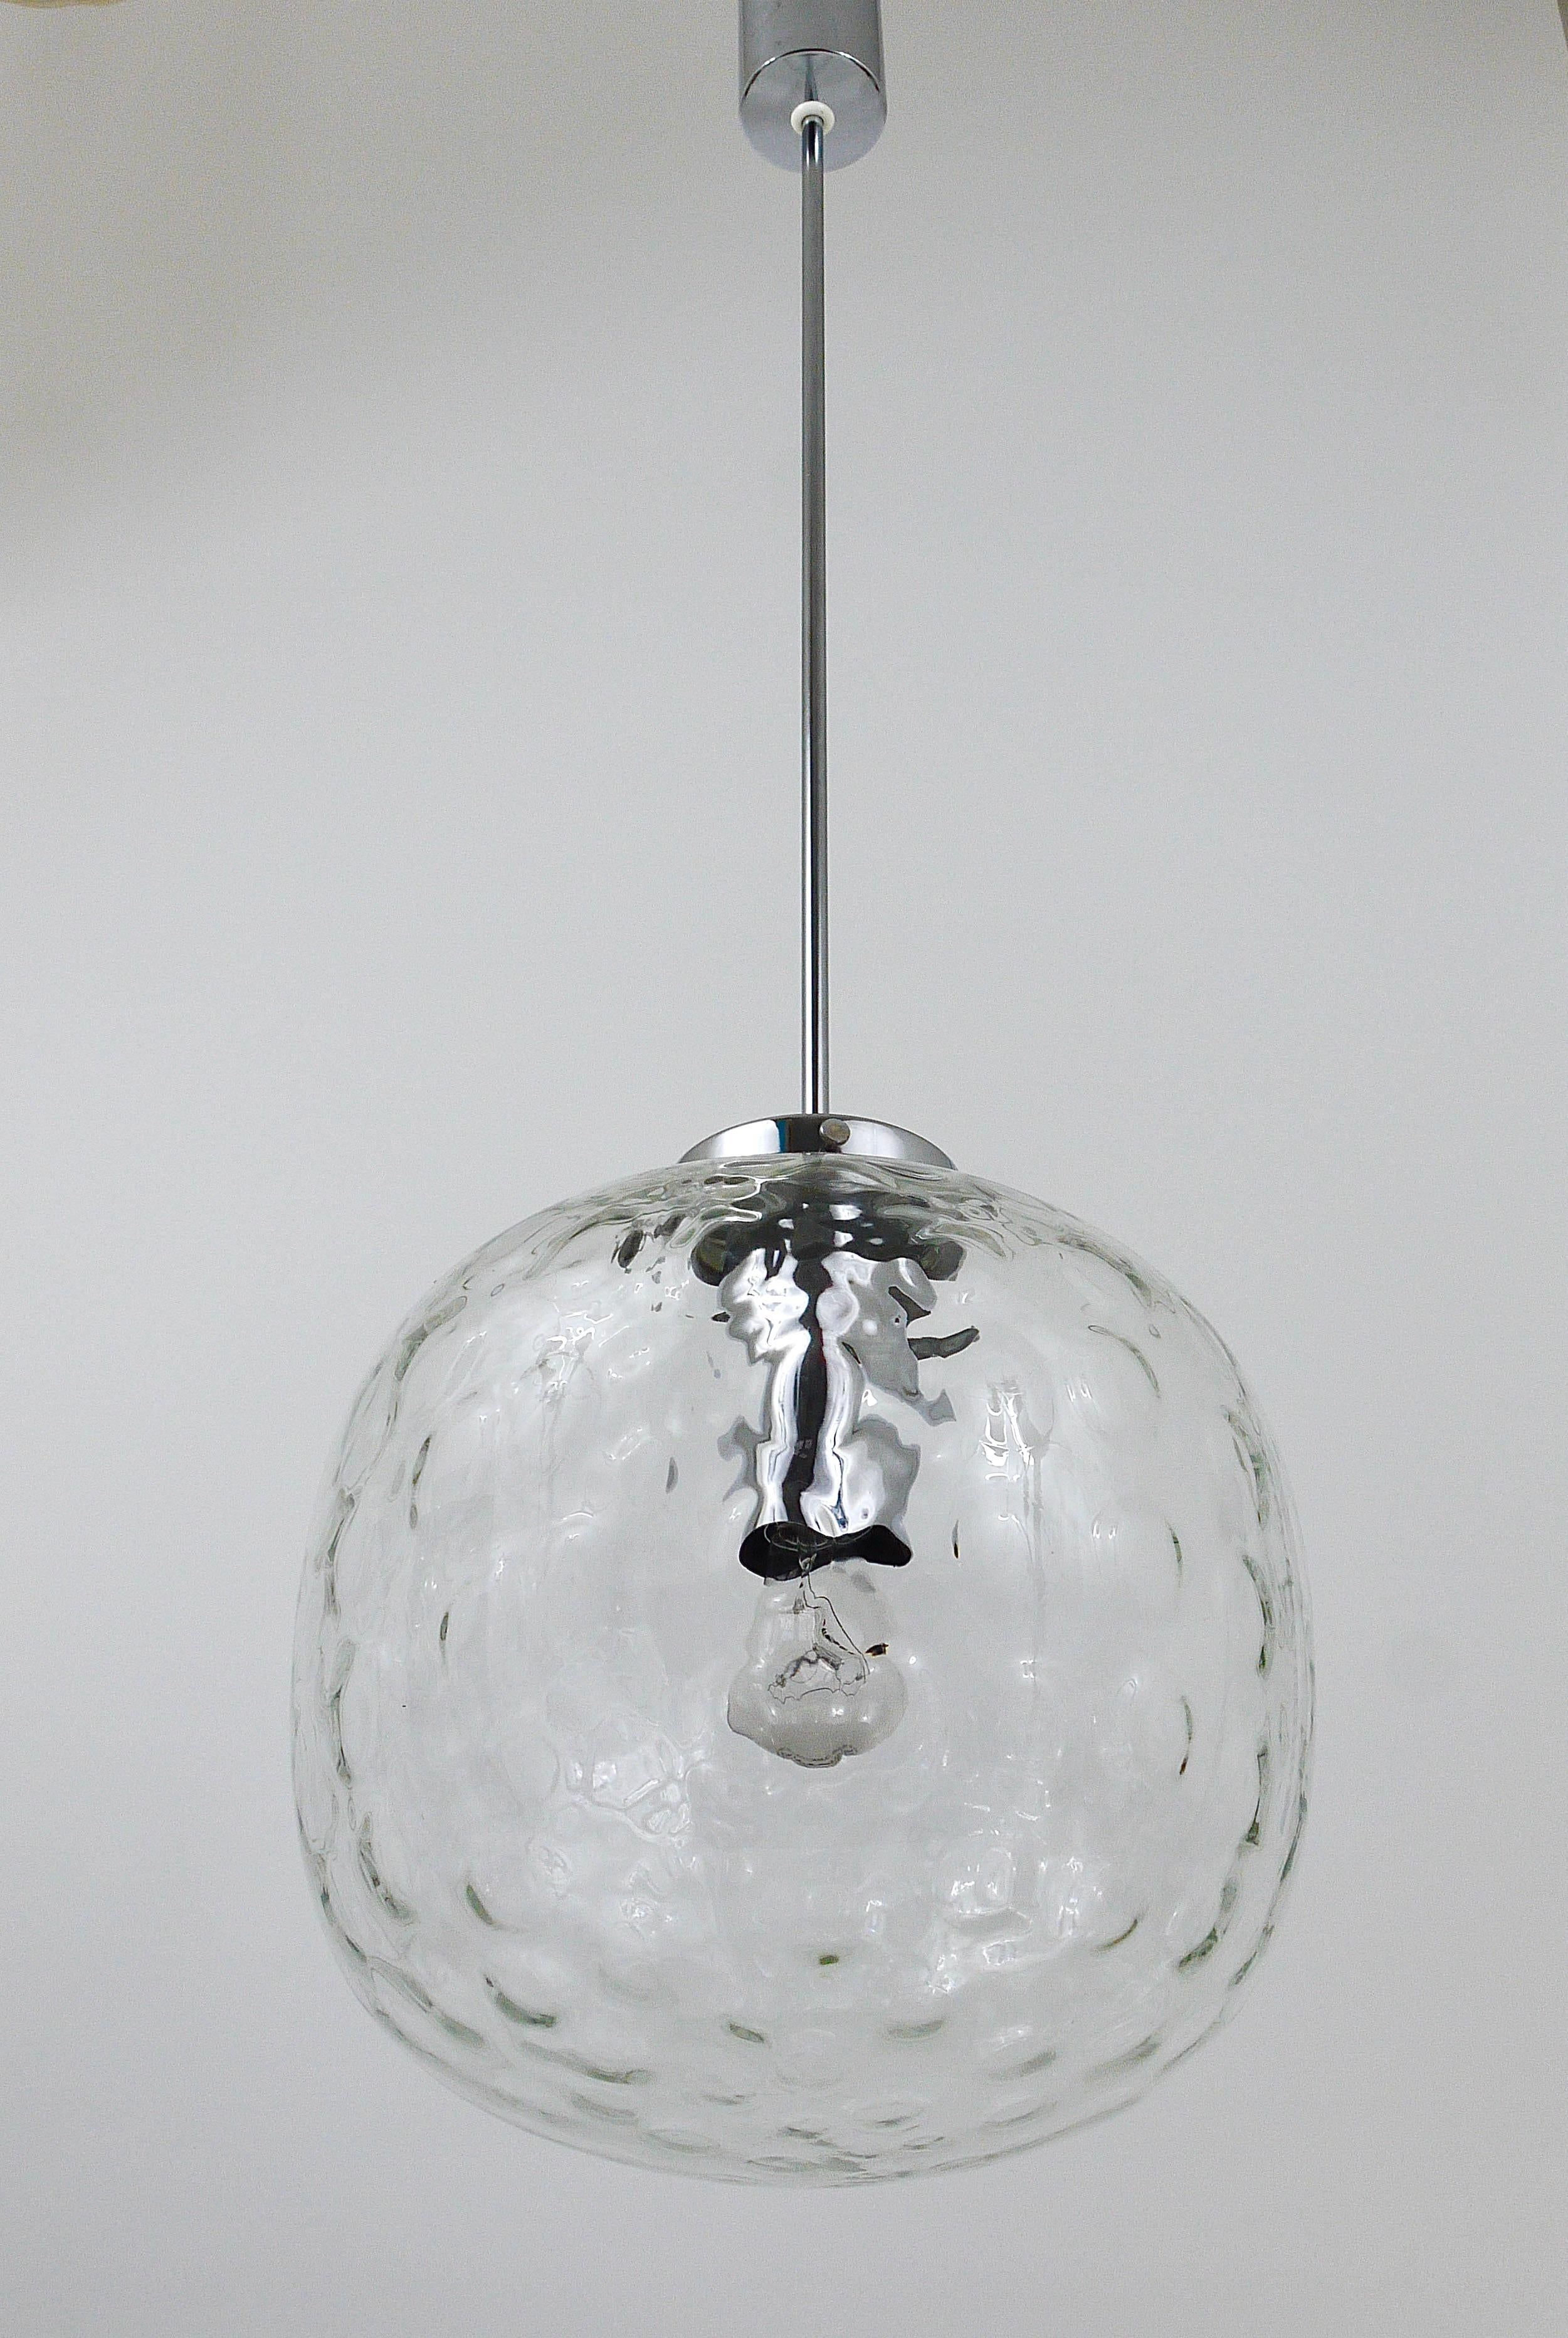 Metal Large Bubble Melting Glass and Chrome Globe Pendant Lamp, Germany, 1970s For Sale